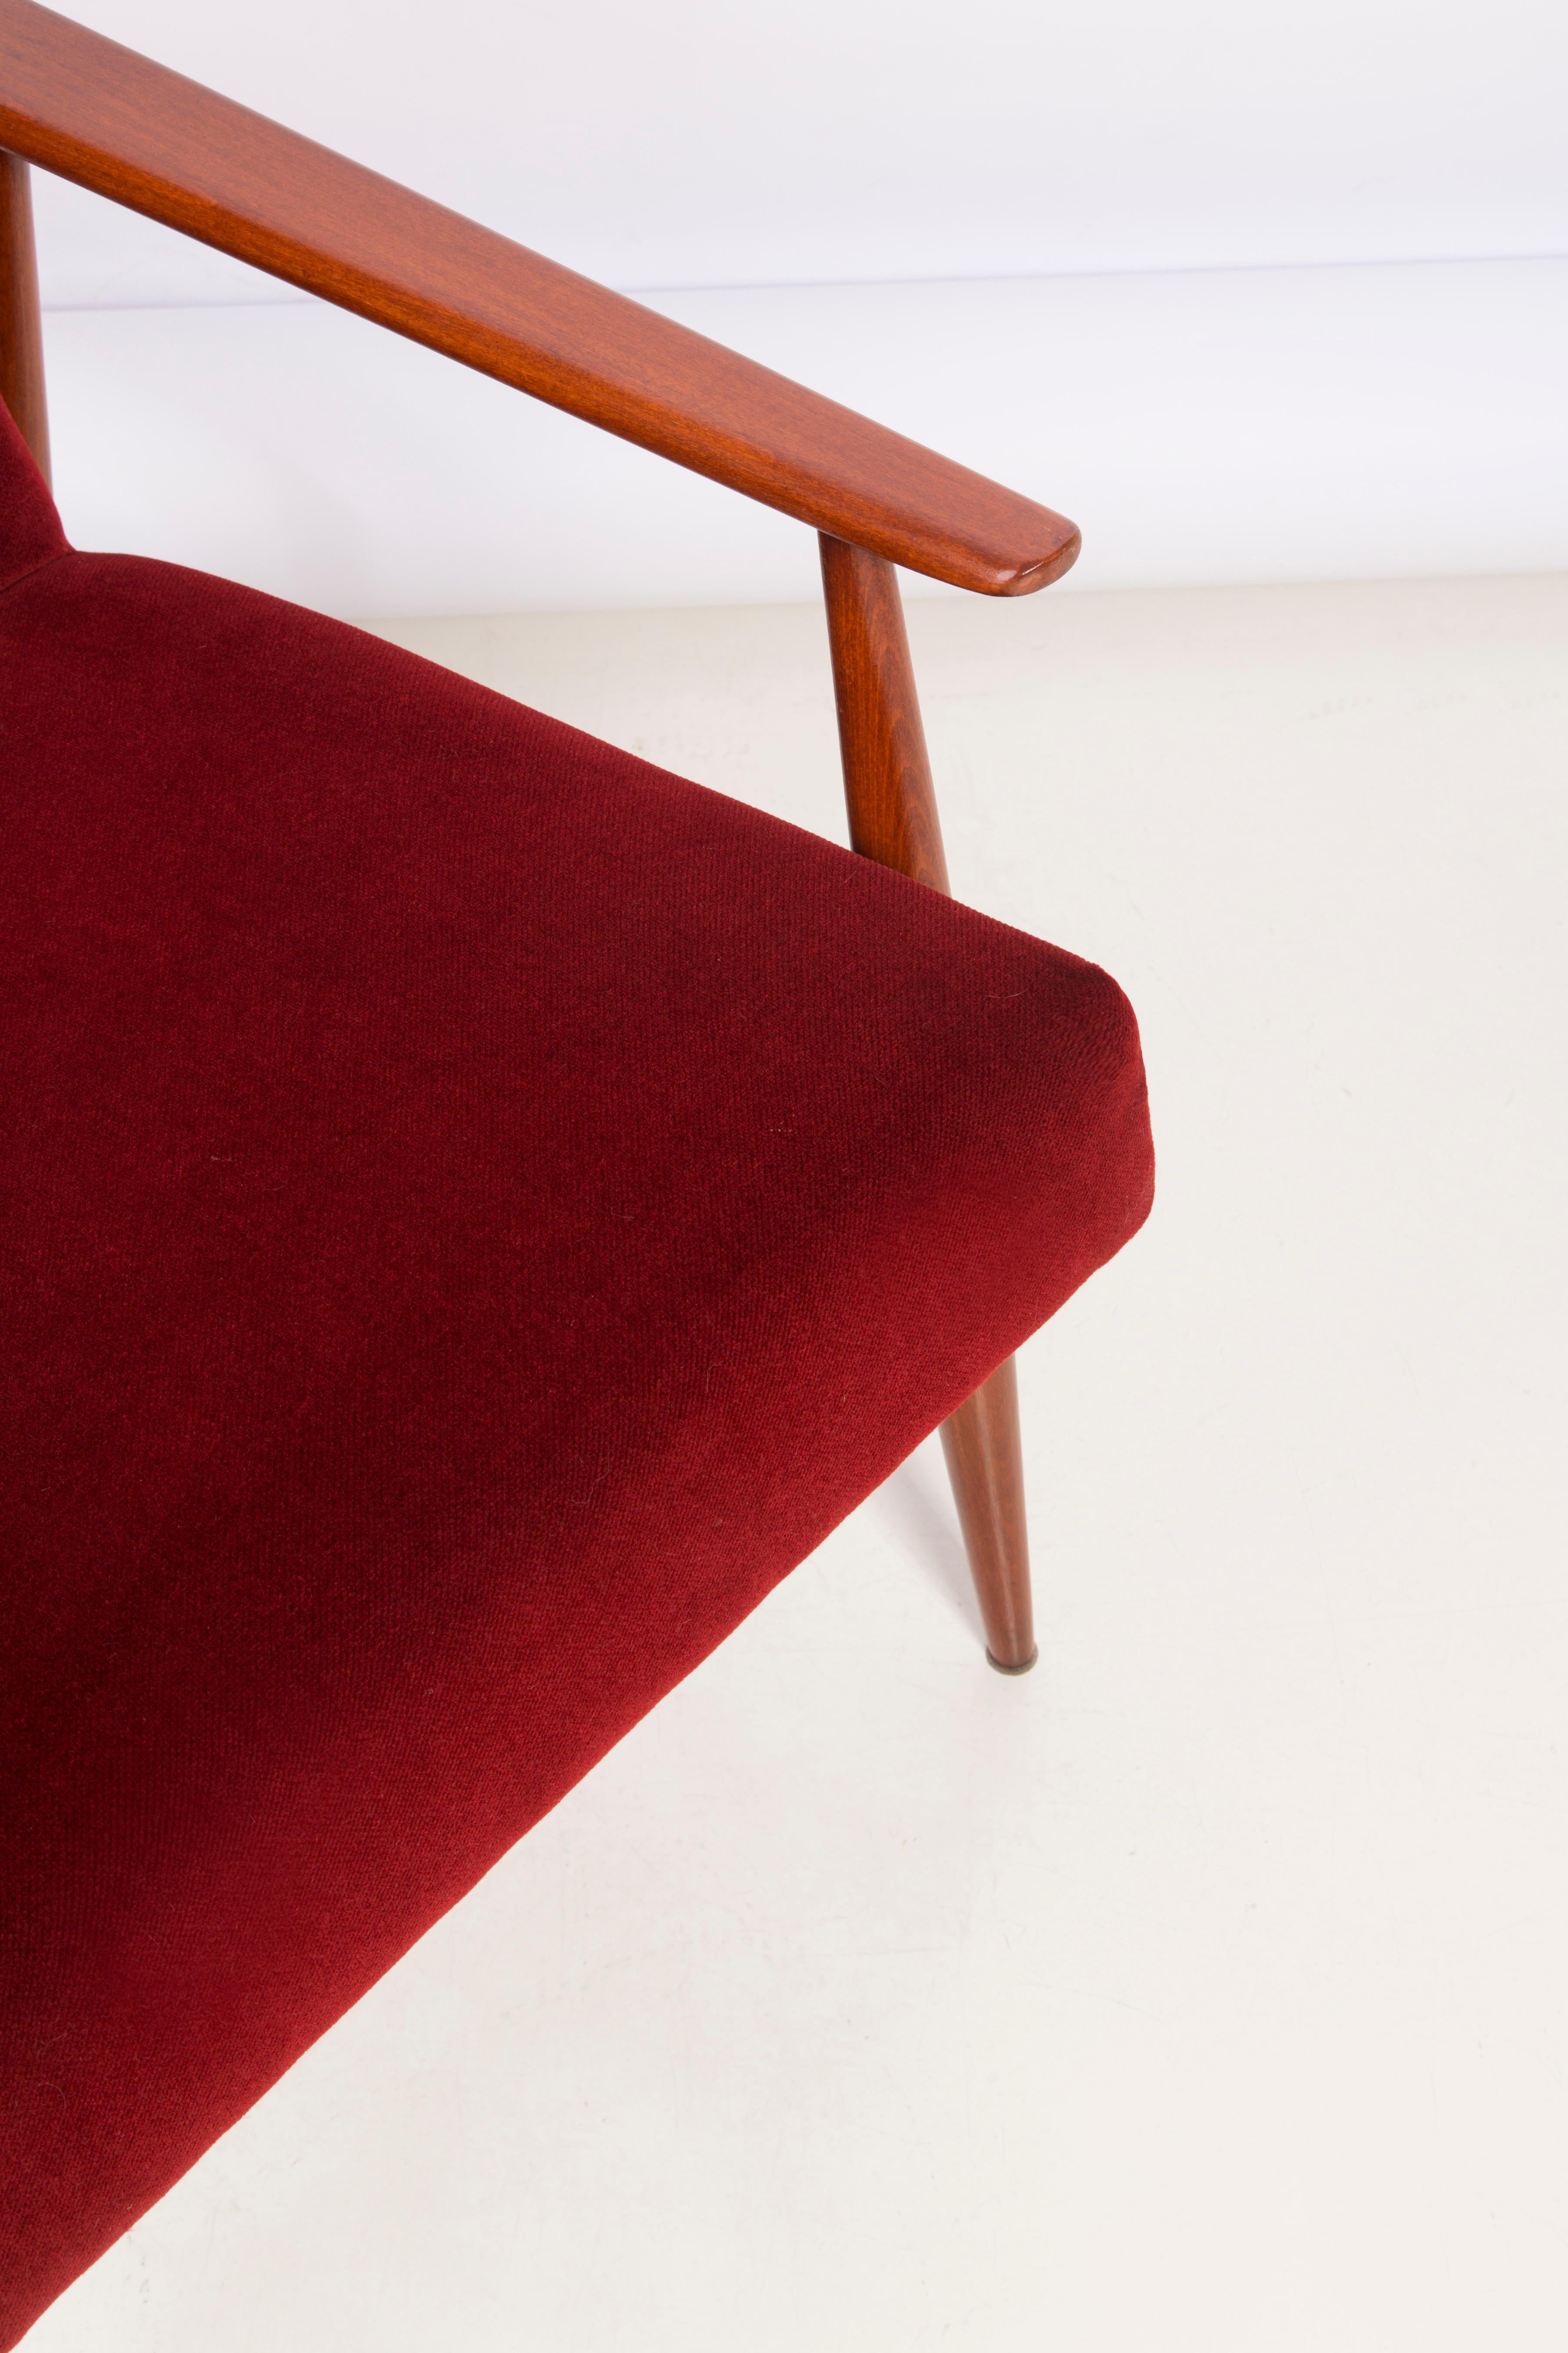 Polish Set of Two 20th Century Burgundy Dark Red Dante Armchairs, H. Lis, 1960s For Sale